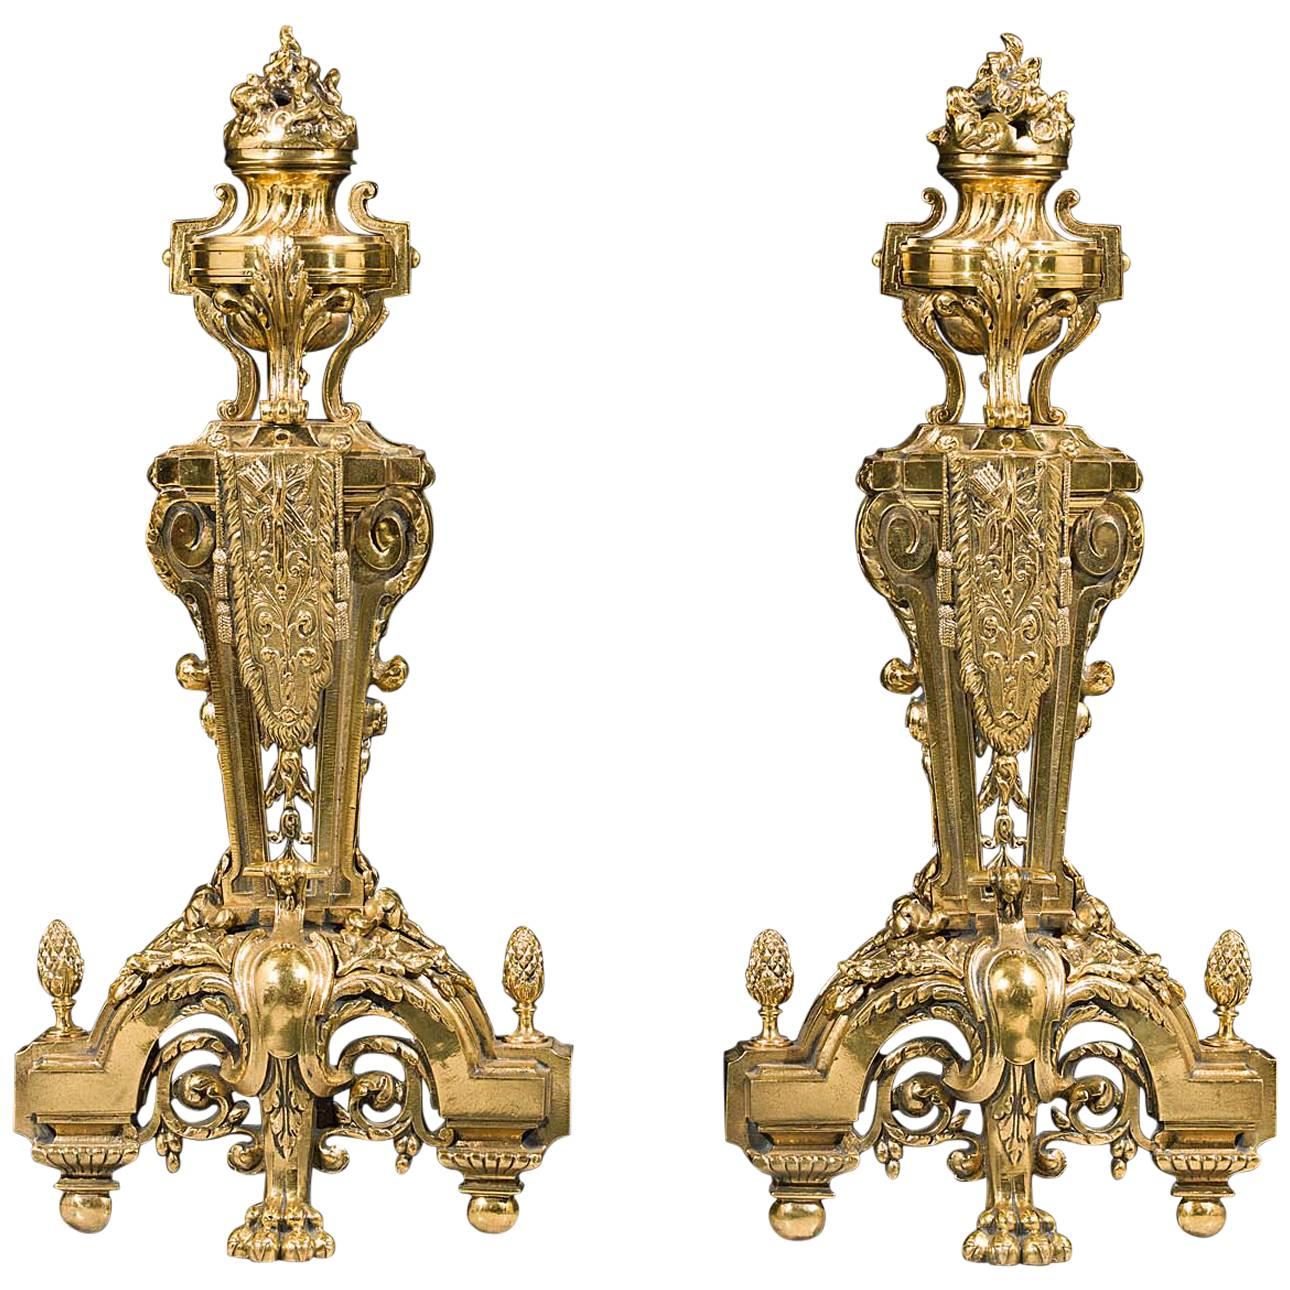 Antique Pair of Large Finely Cast Gilt Brass French Regency Style Chenets